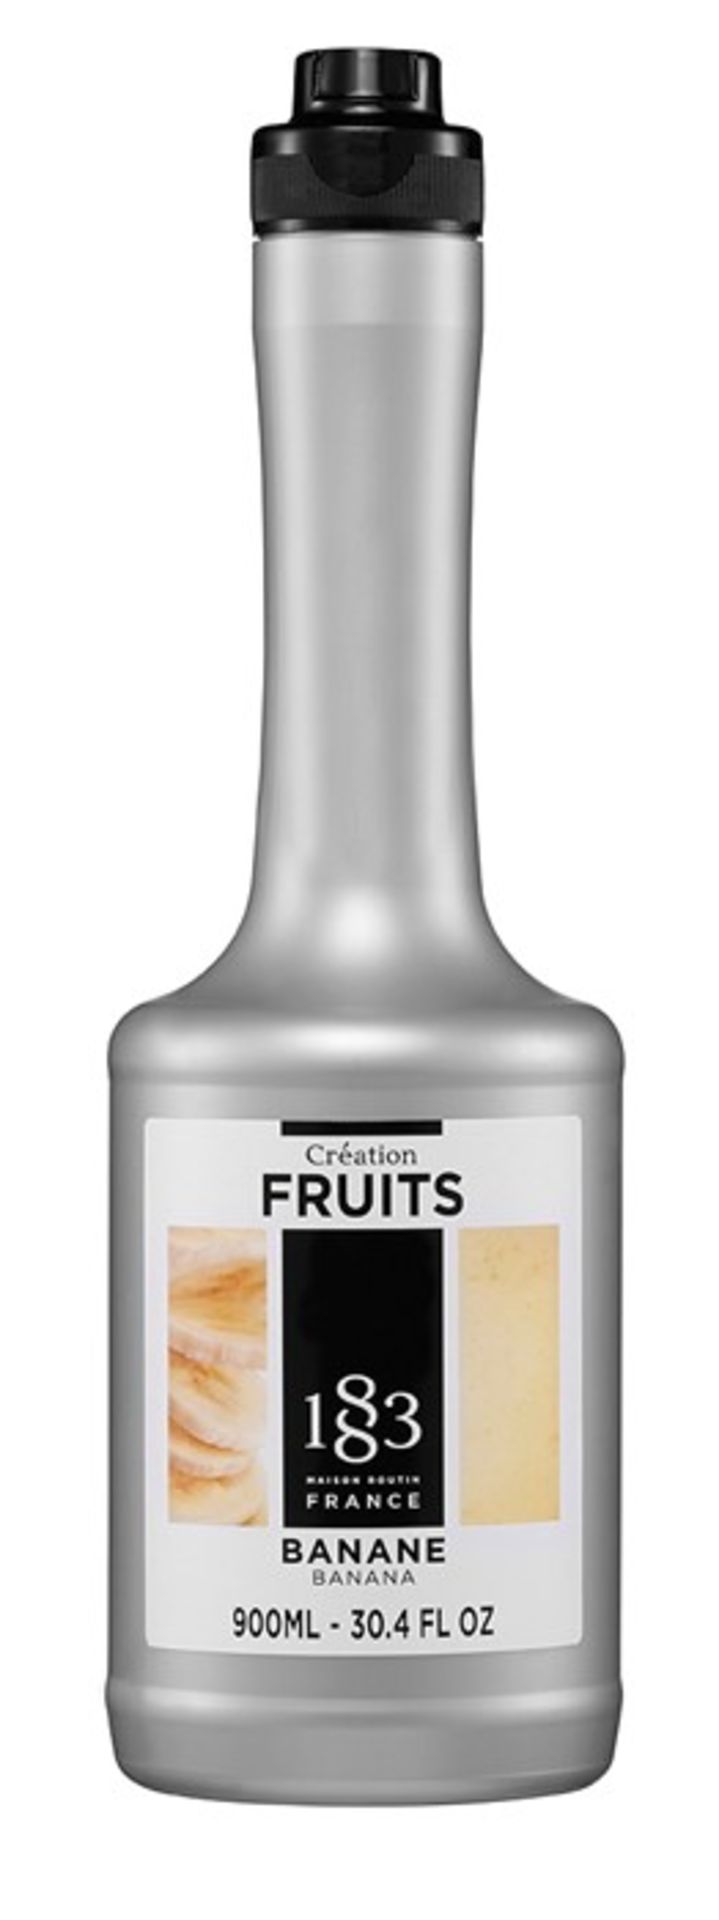 1 LOT TO CONTAIN A BOX OF 6 X 900ML BOTTLES OF ROUTIN 1883 CREATION FRUIT BANANA PUREE FOR